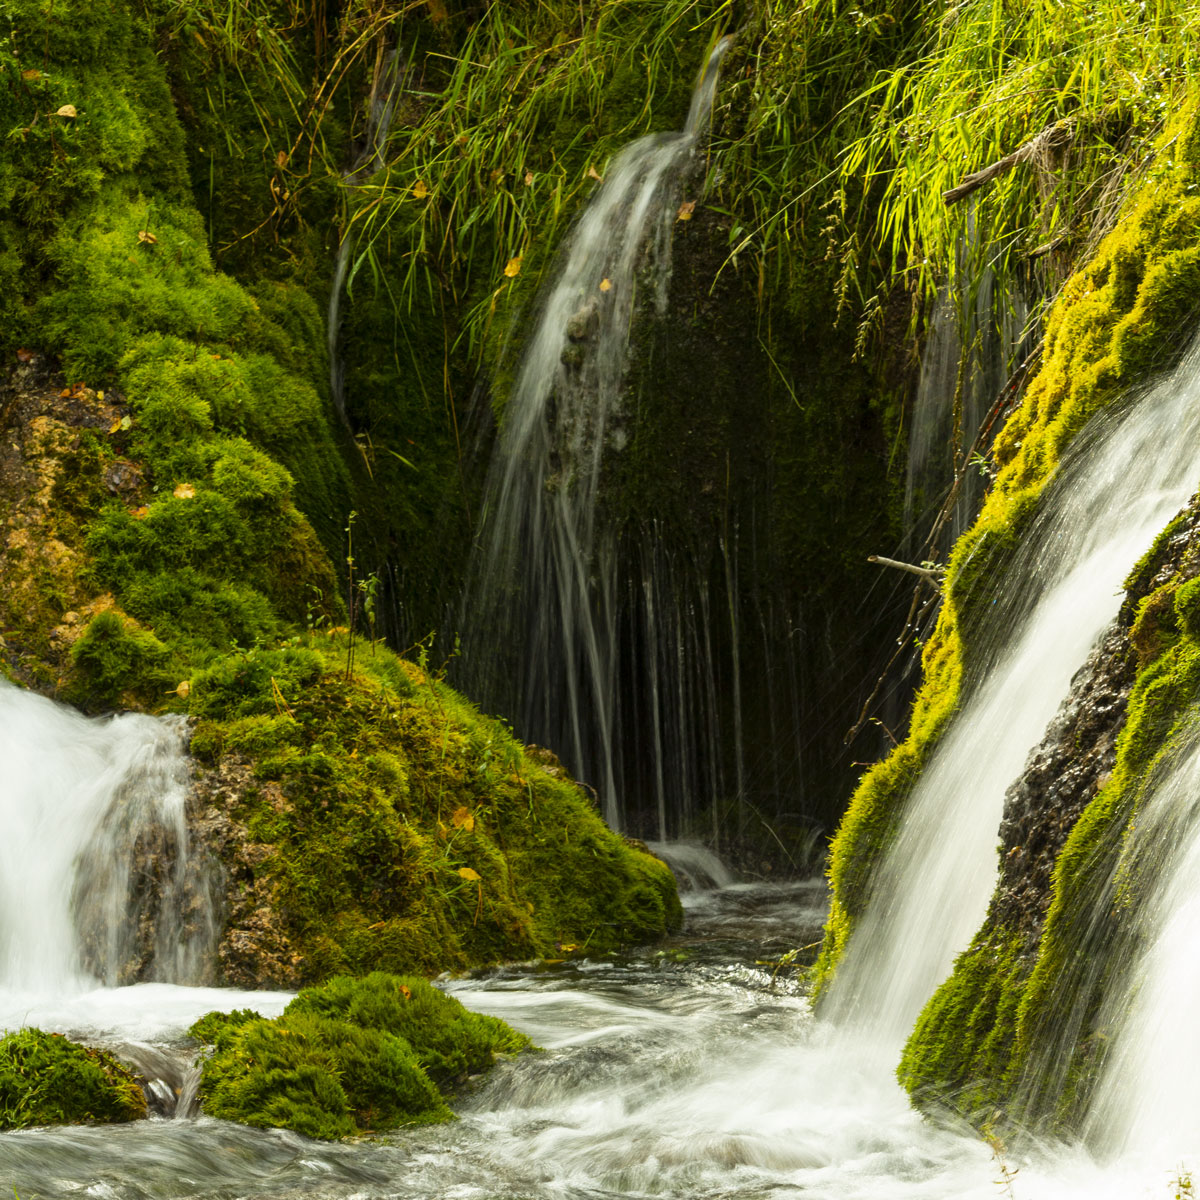 Sparkling waters of Roughlock Falls pour down over green lichen covered rocks into several smaller waterfalls